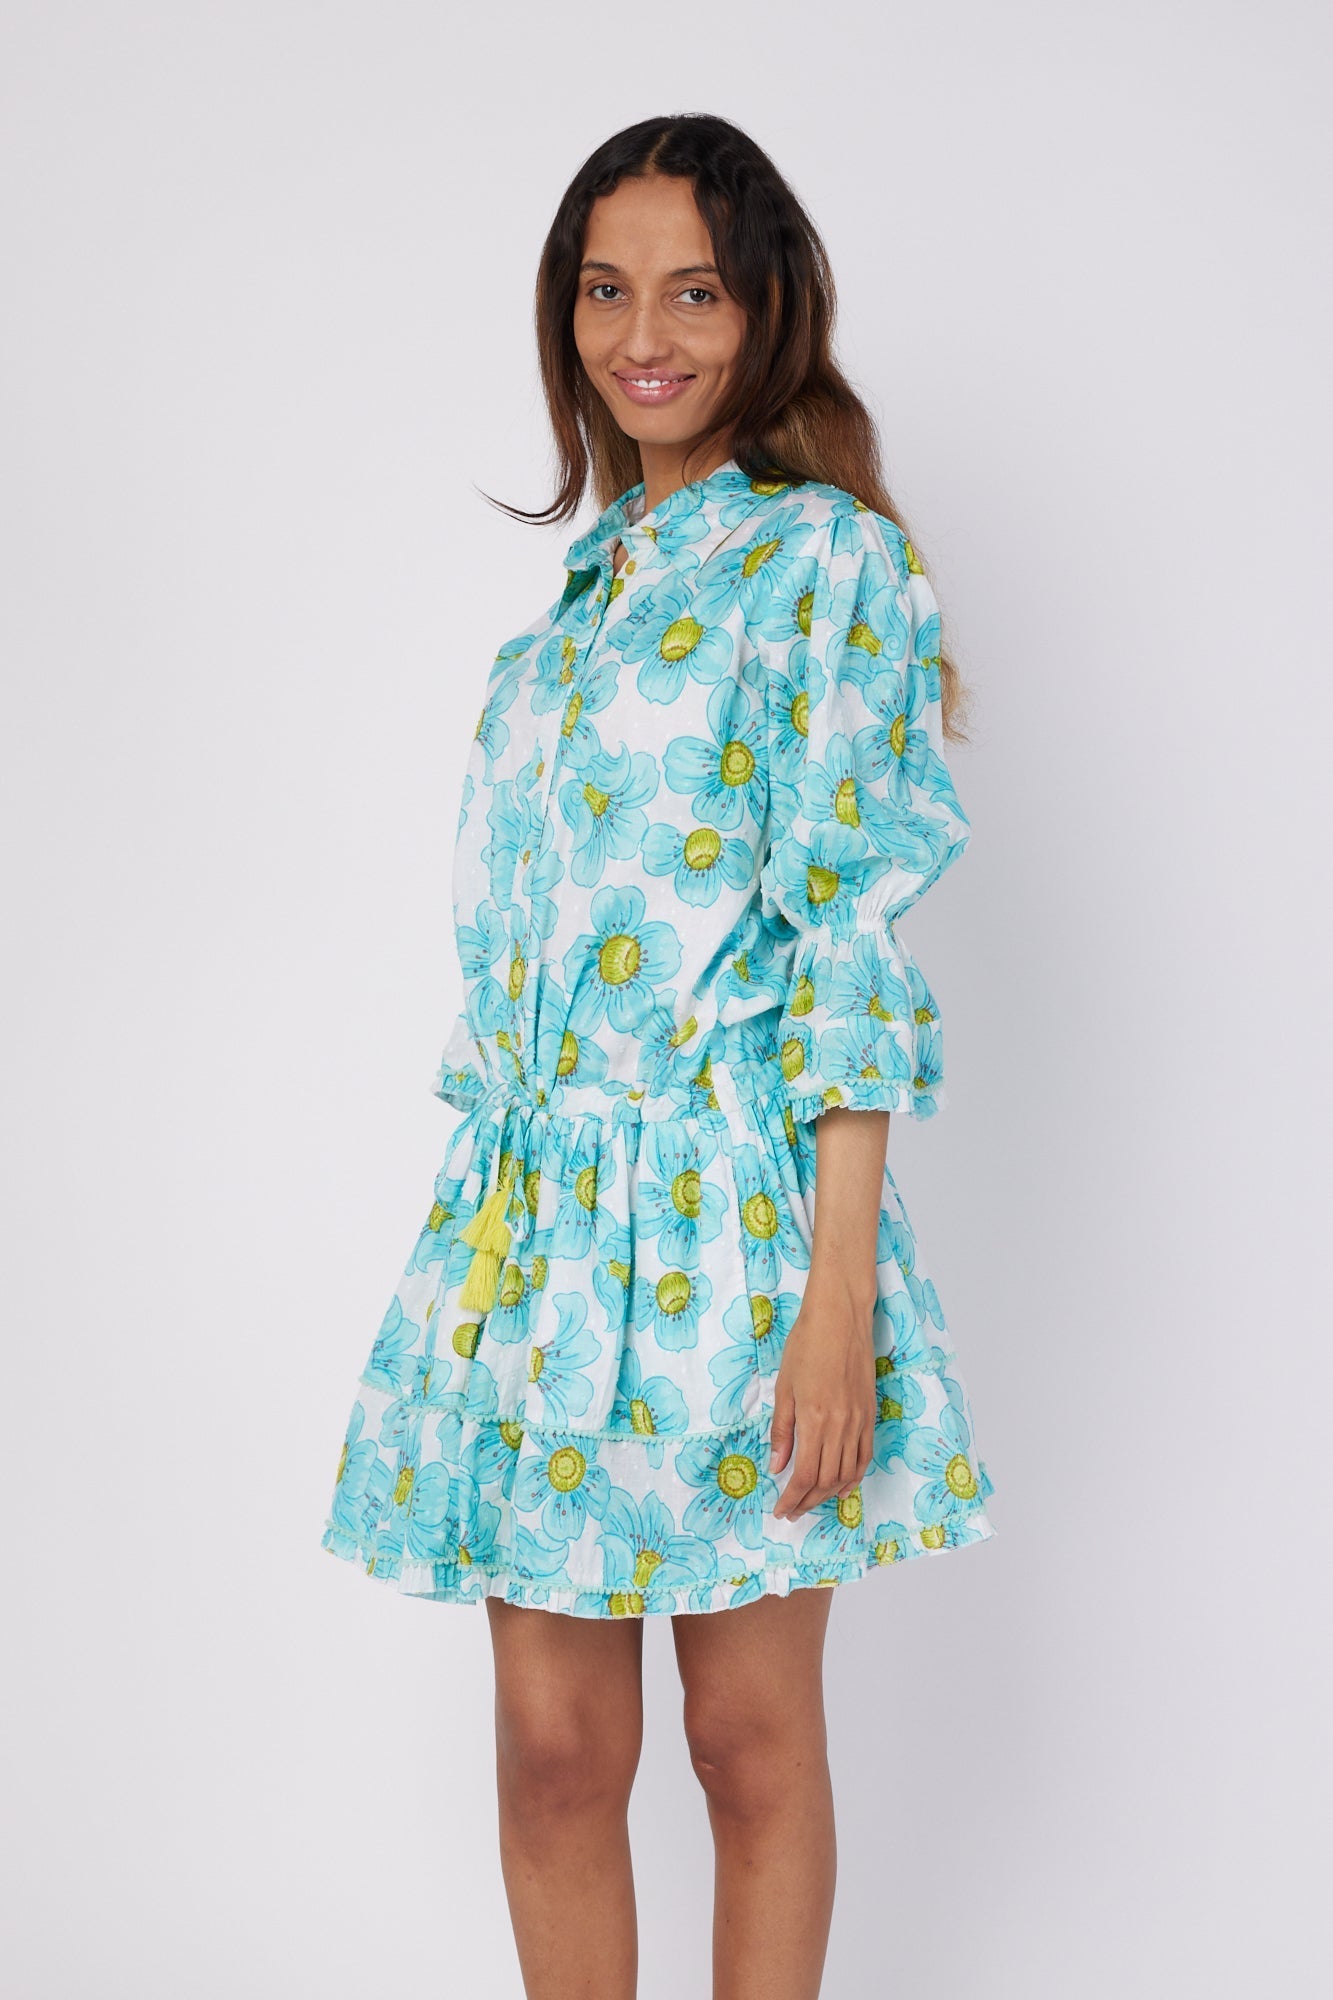 ModaPosa Penelope 3/4 Frill Puff Sleeve Drop Waist Mini Dress with Pockets in Blue Floral . Discover women's resort dresses and lifestyle clothing inspired by the Mediterranean. Free worldwide shipping available!